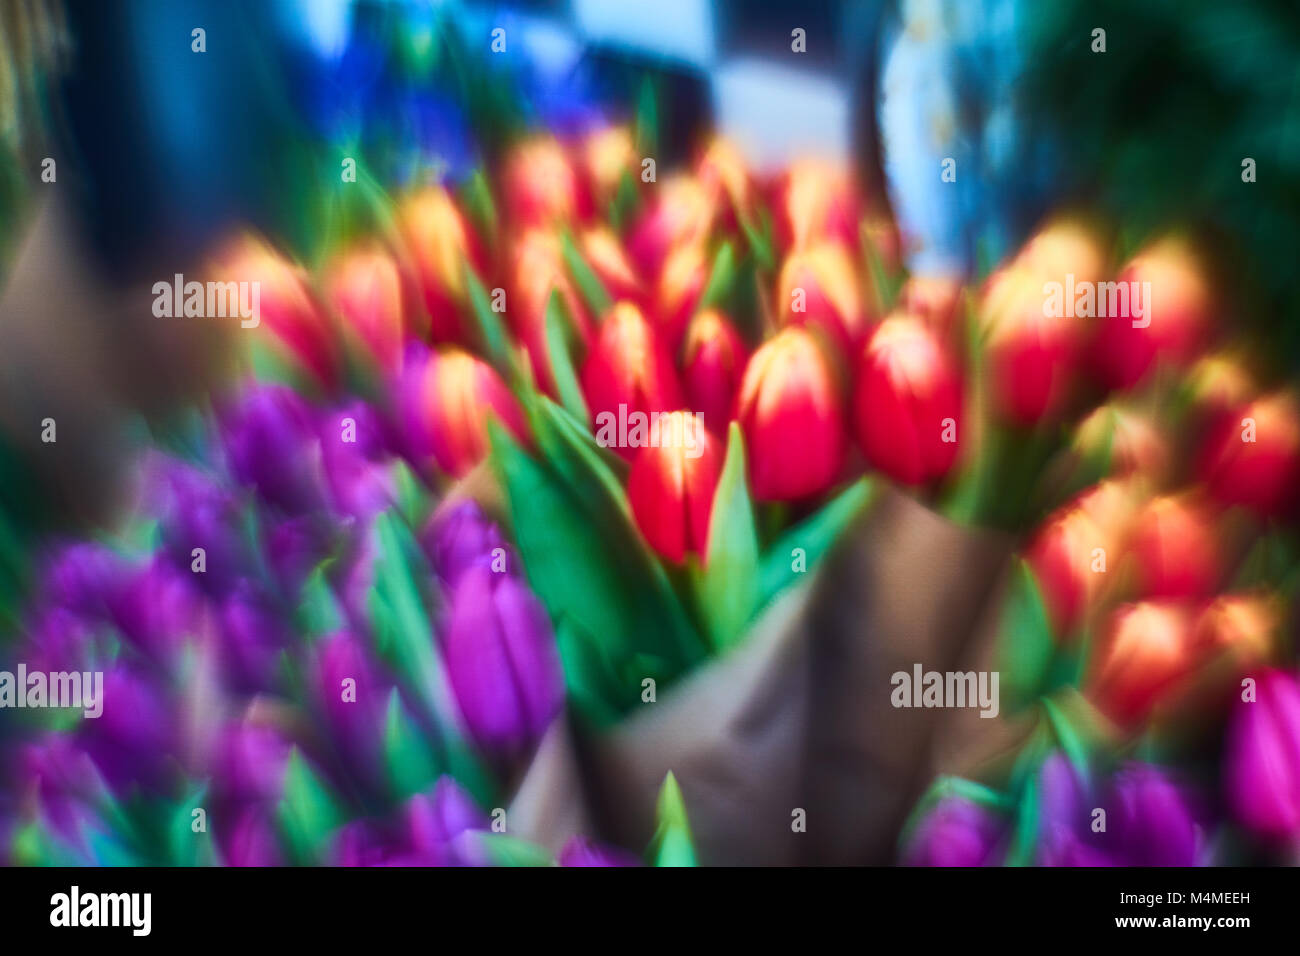 Beautifully soft focused Tulips, creamy background for ethereal, dreamy effect, makes a beautiful background for whatever you would like to use it for Stock Photo